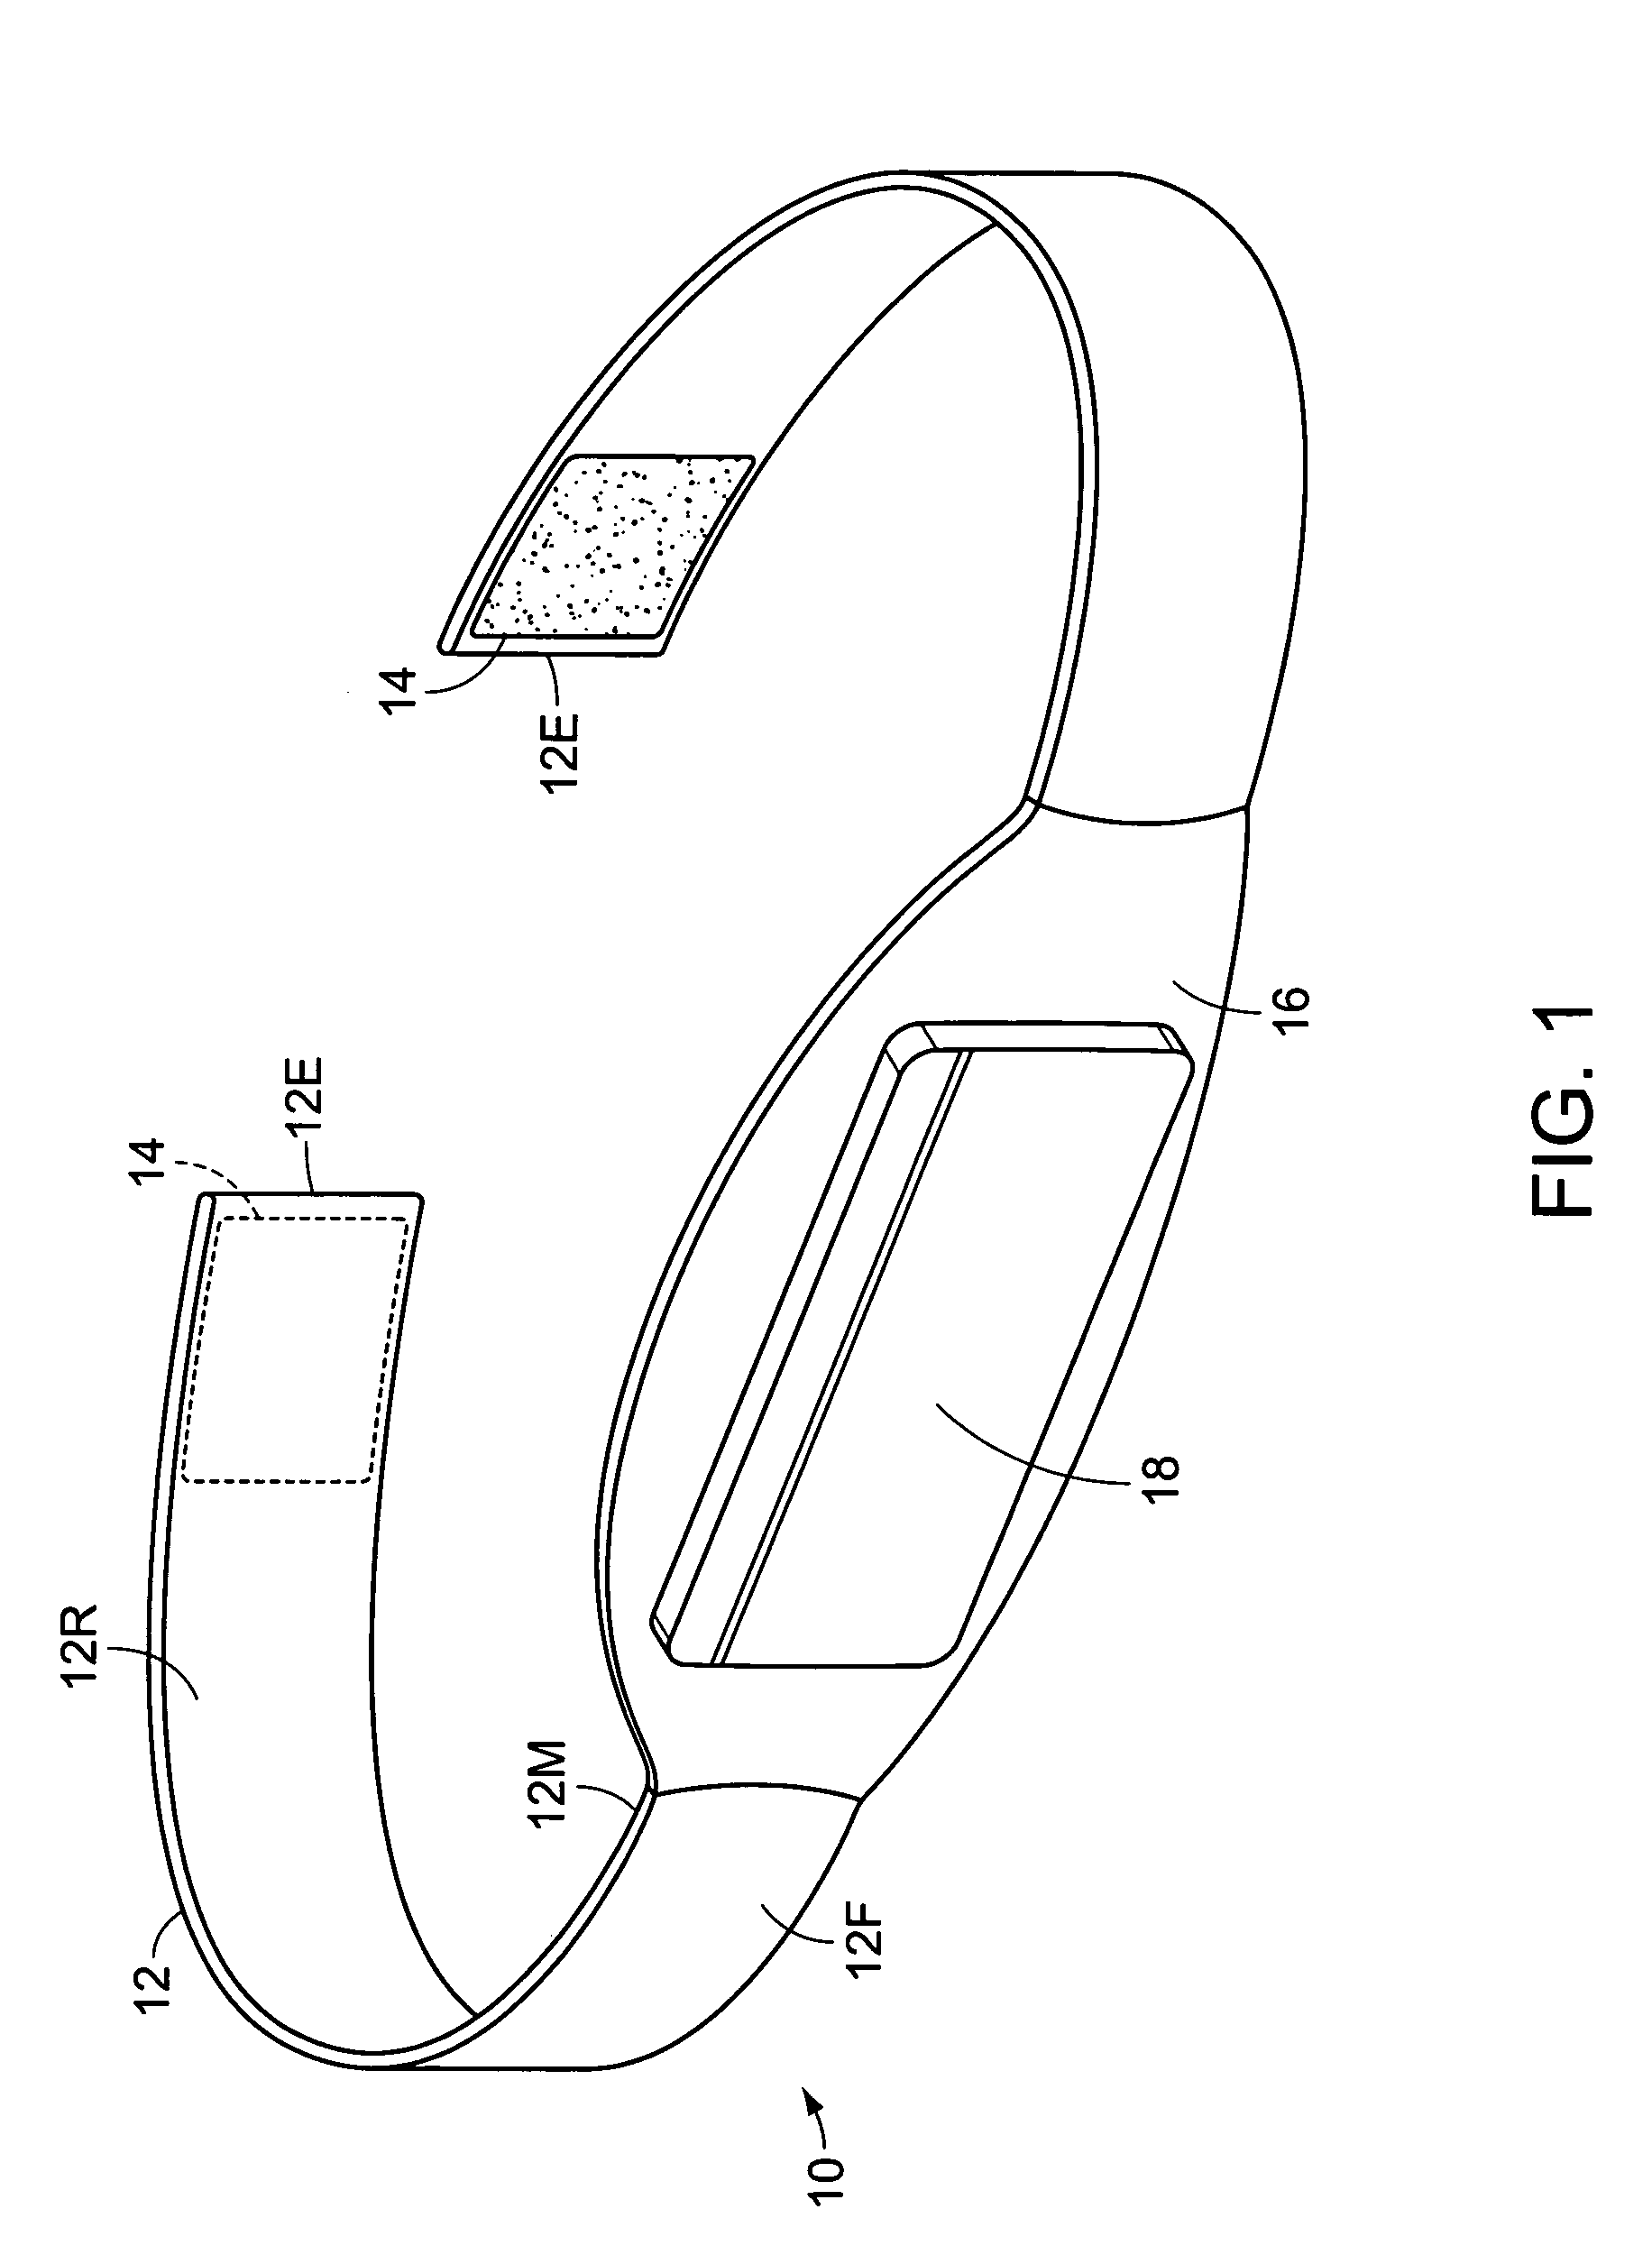 Recreational belt for supporting and housing an ostomy appliance